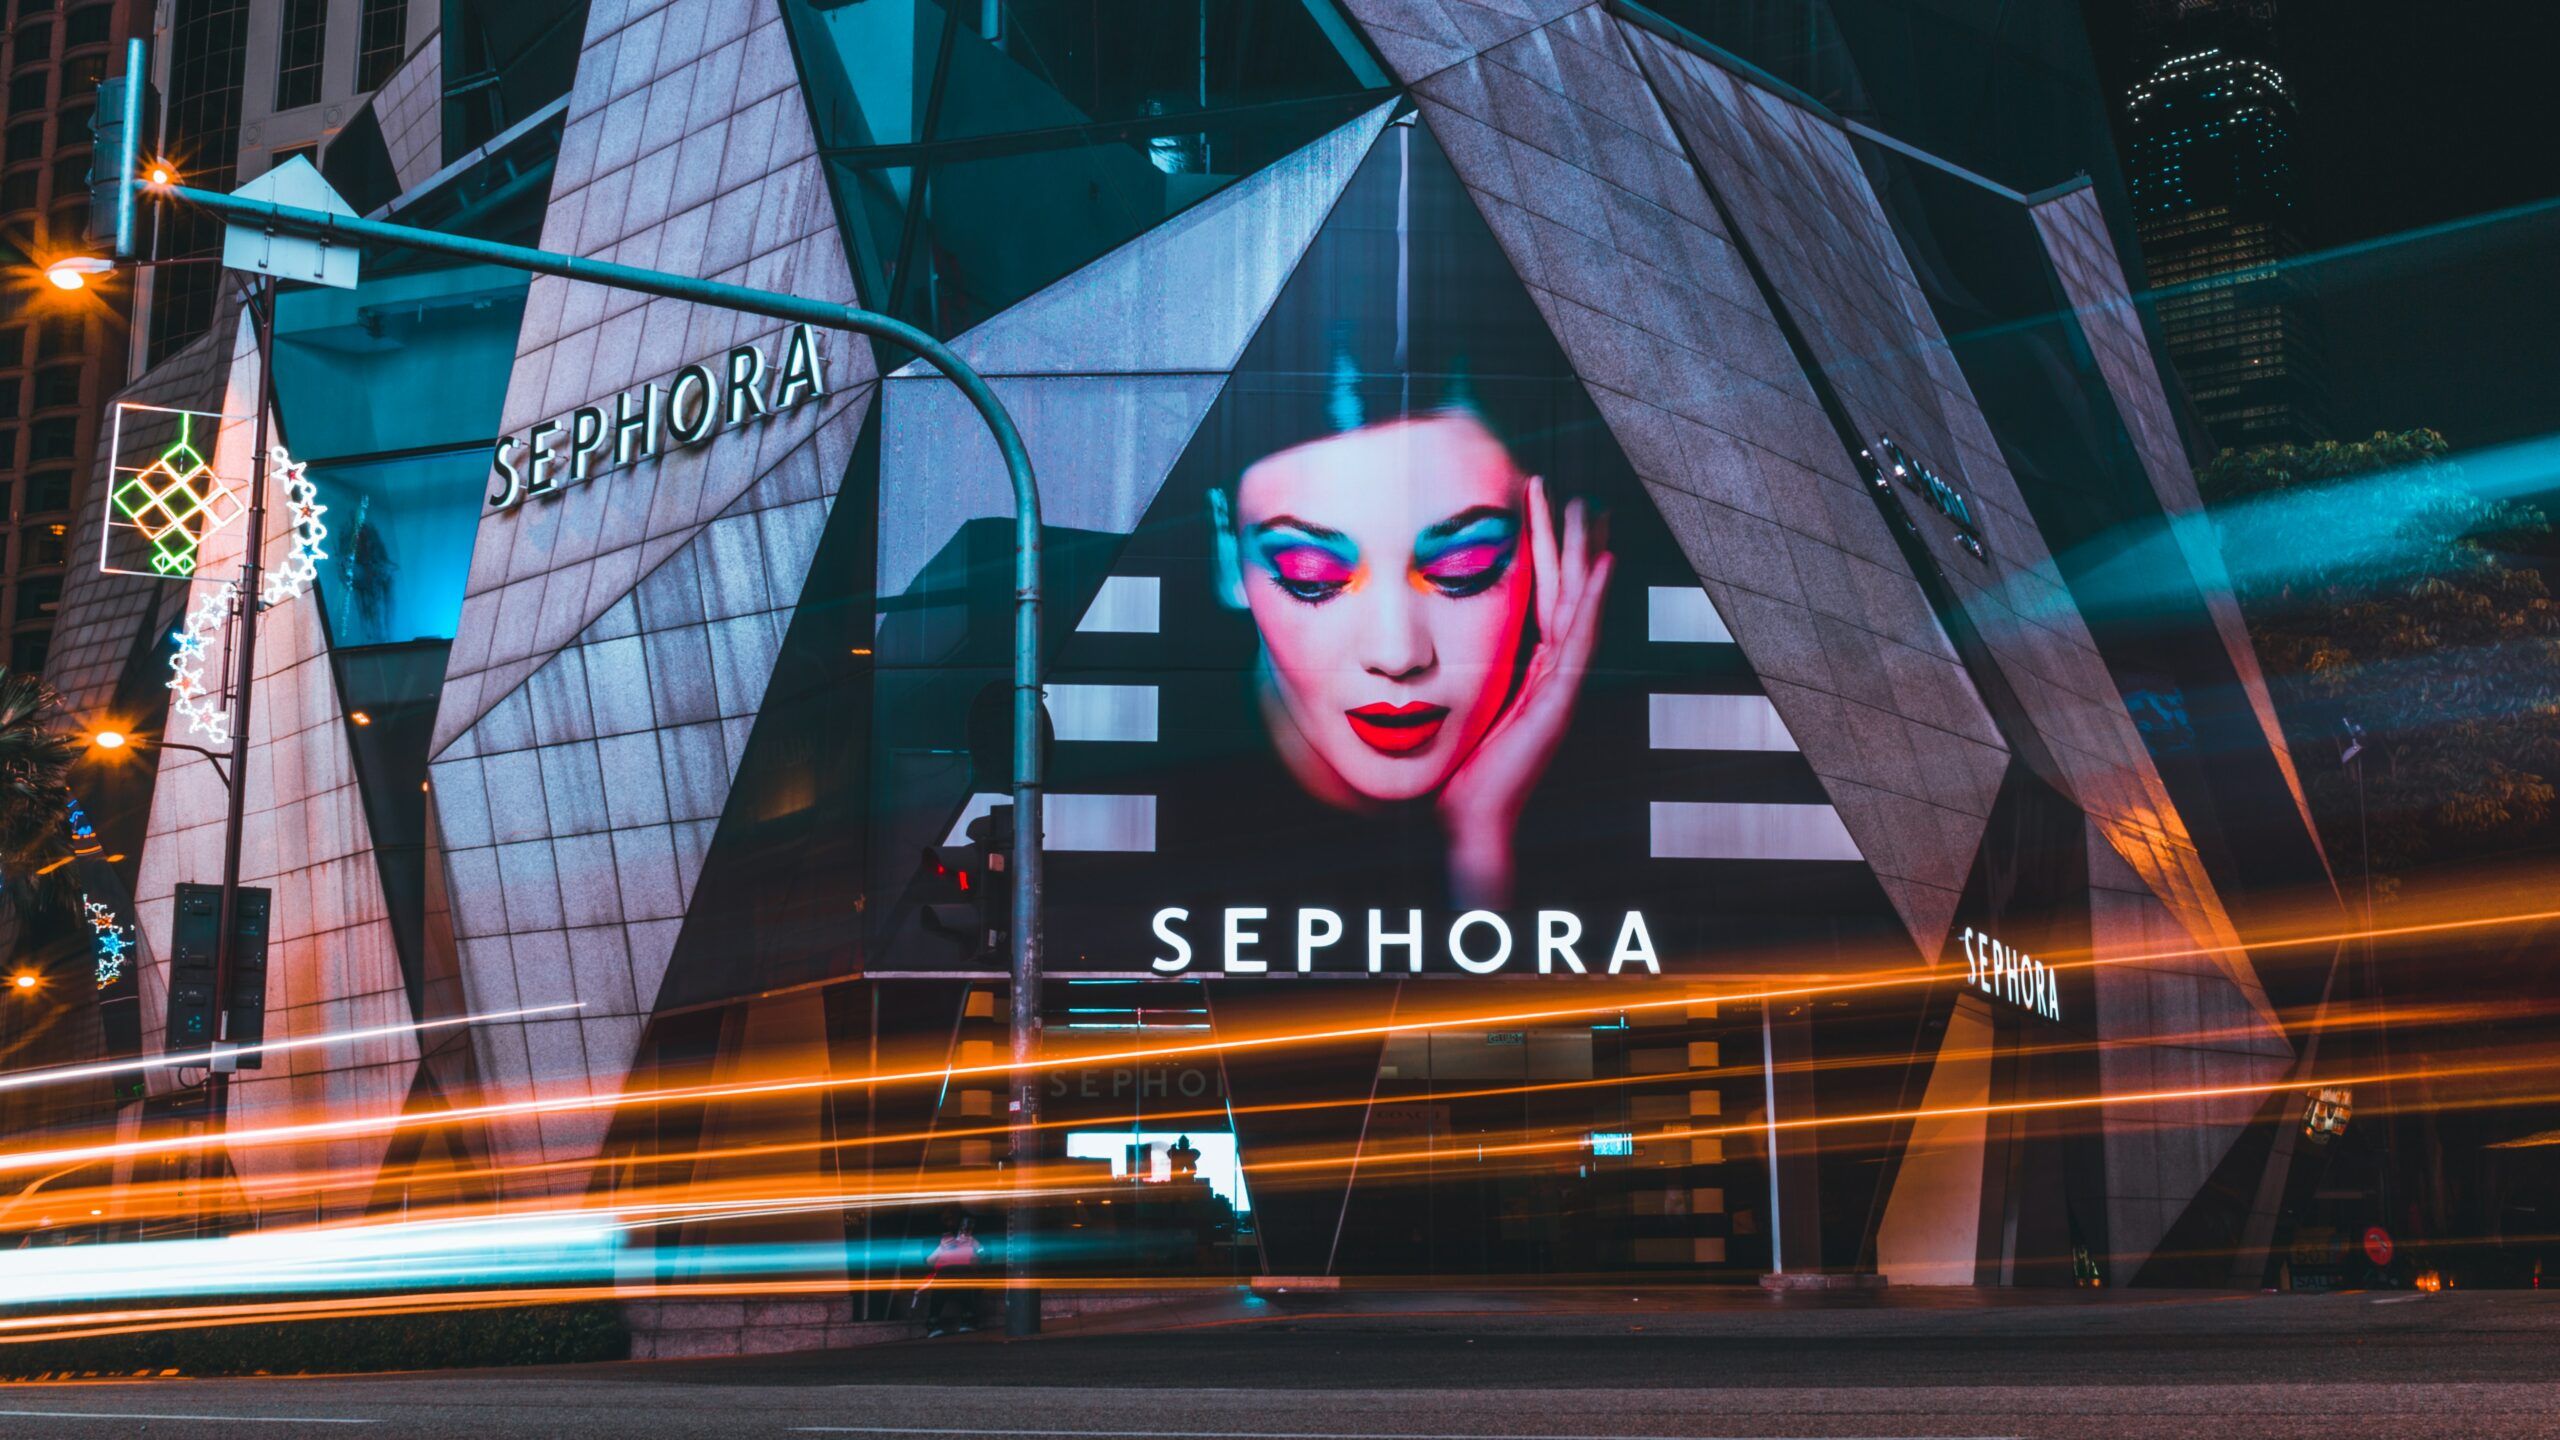 A Sephora store at night with neon lights and a photo of a female model wearing makeup